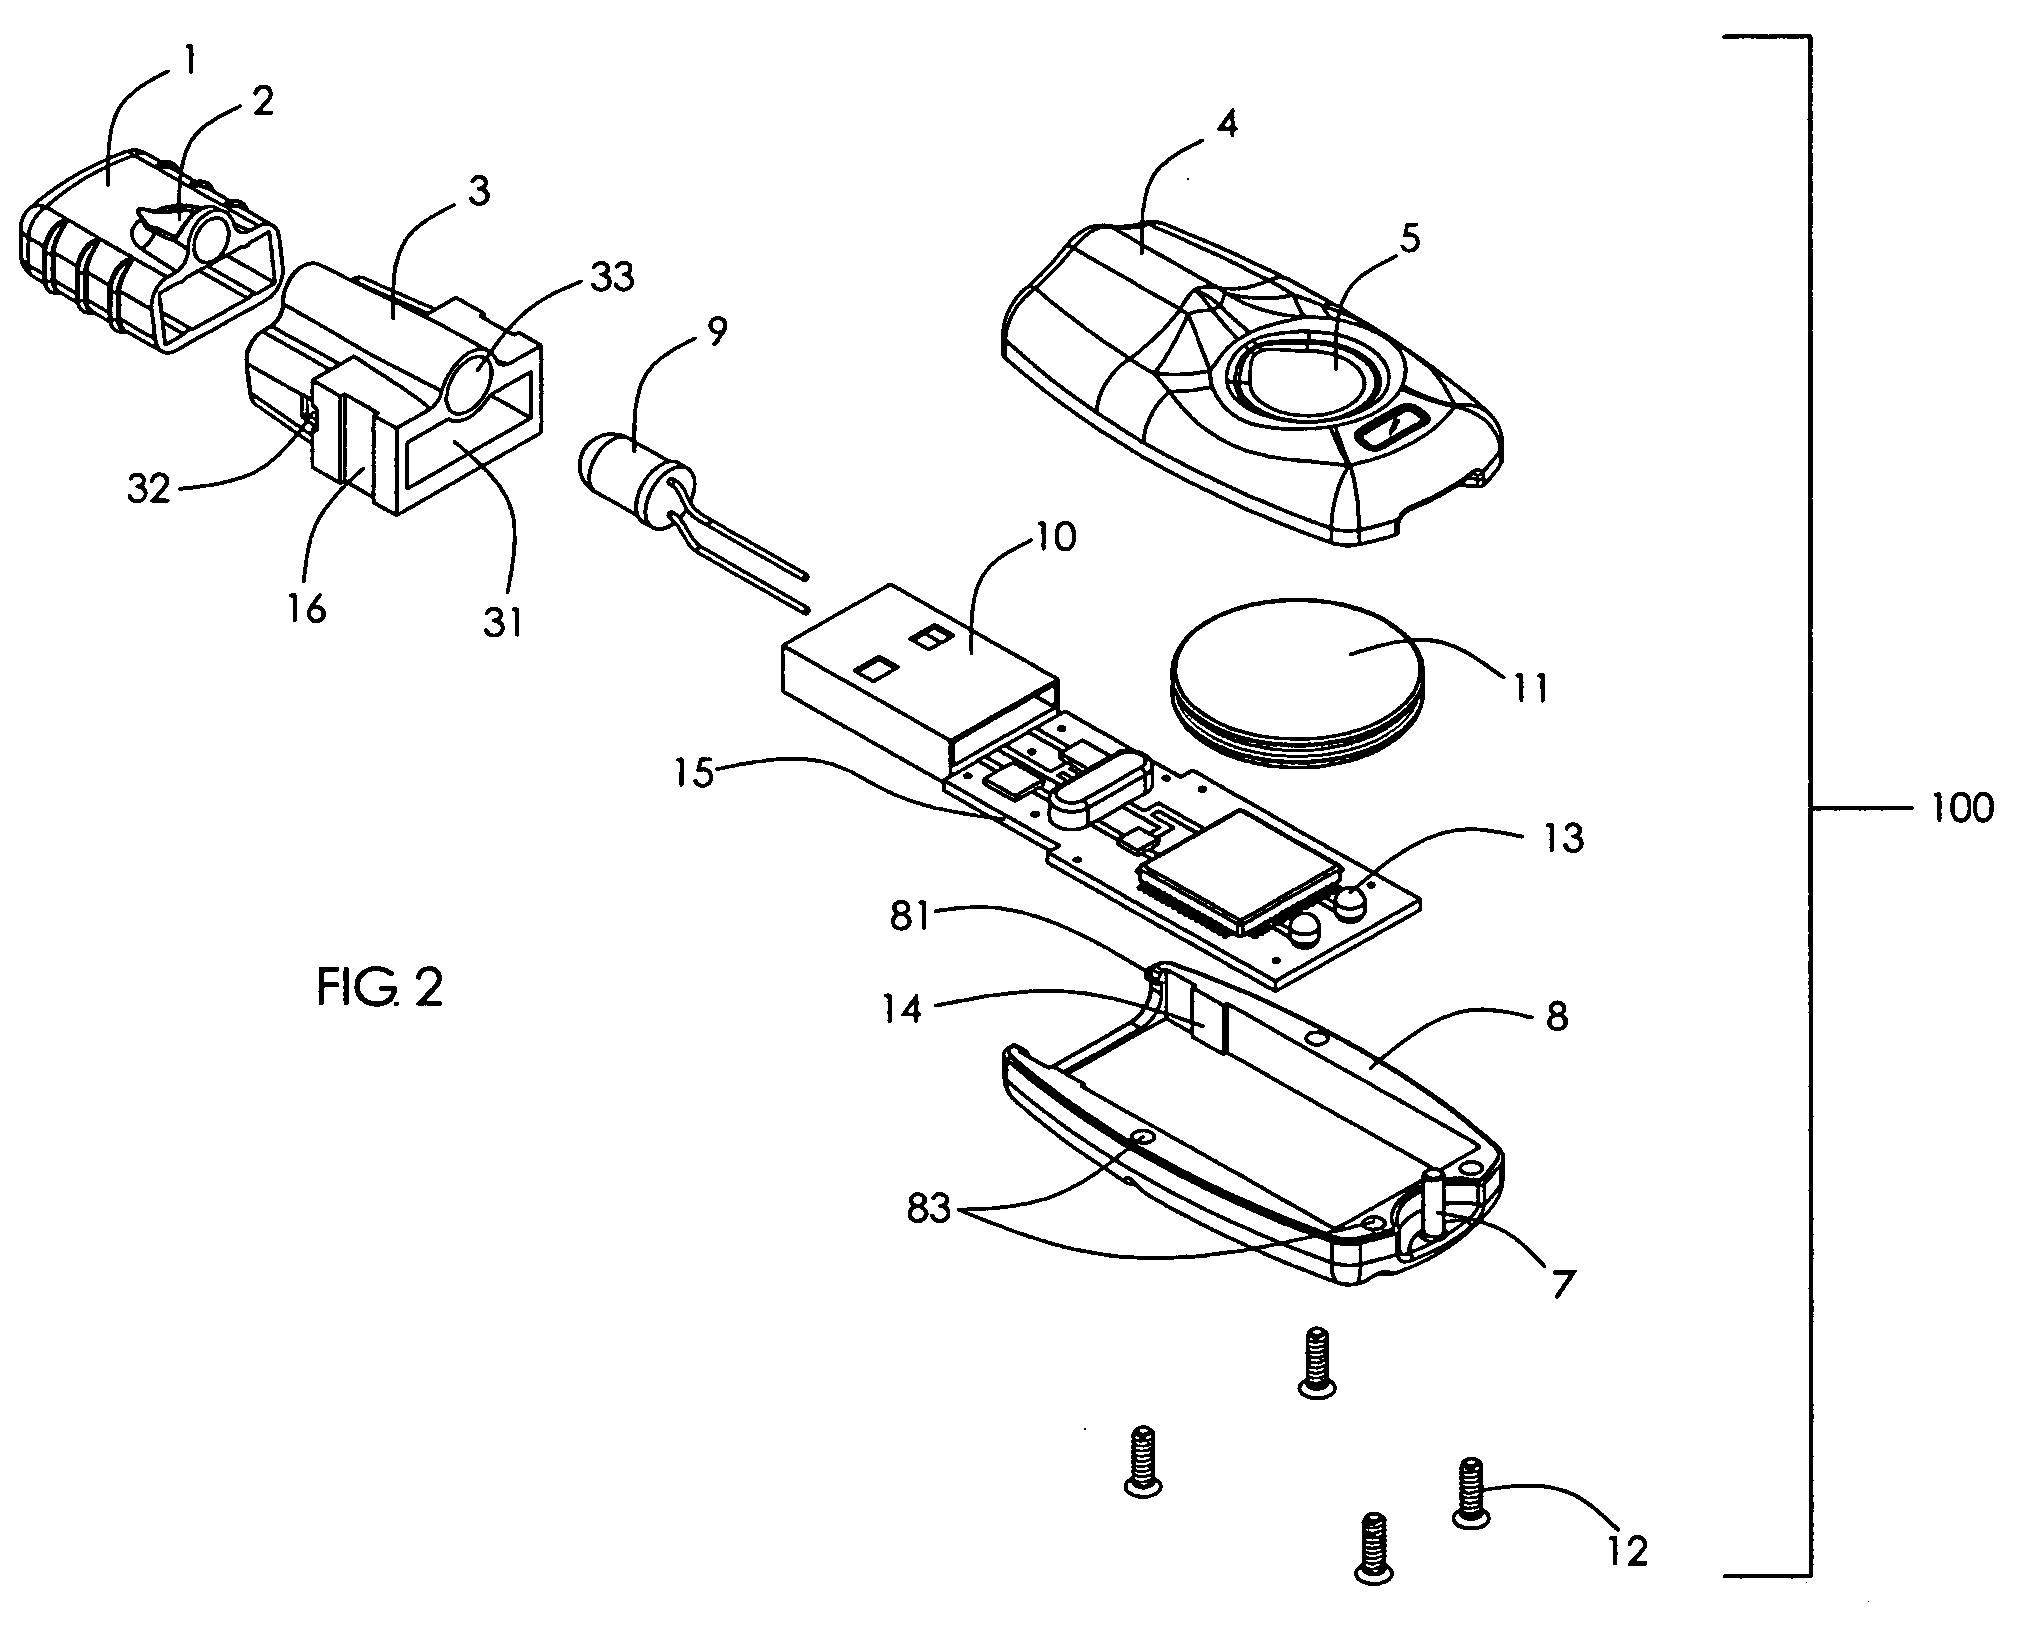 USB memory device with integrated flashlight